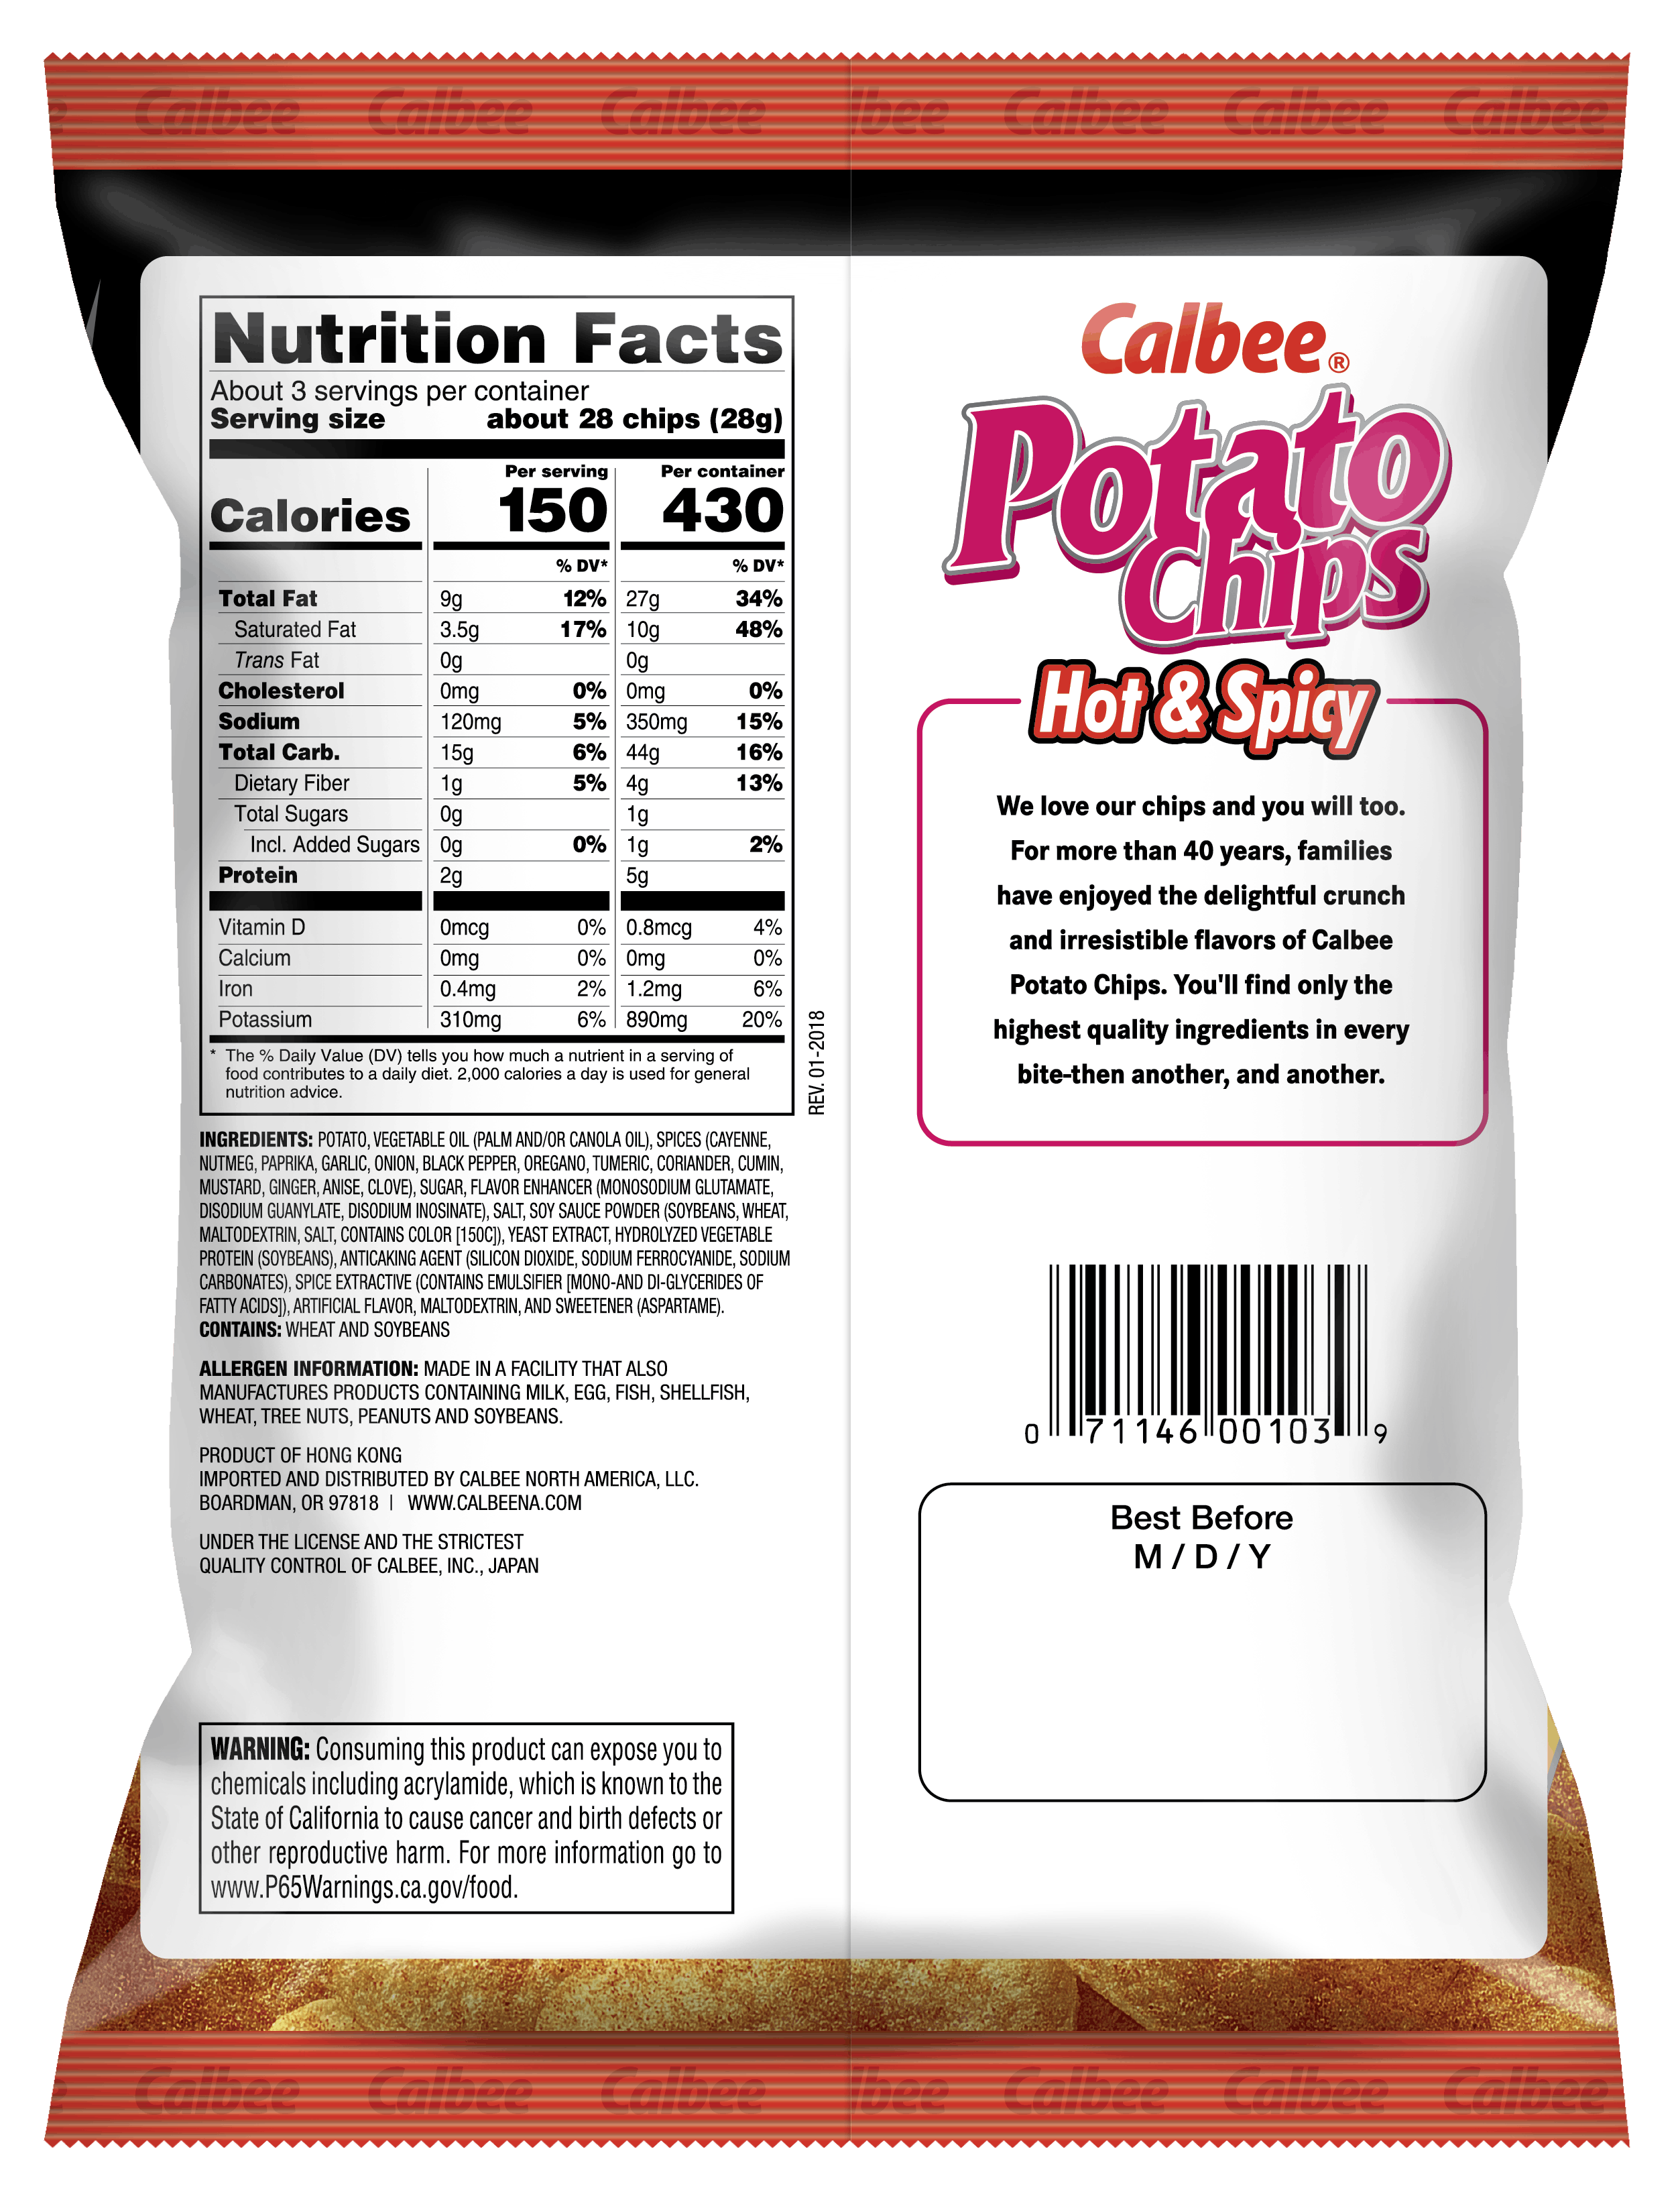 Calbee Potato Chips - Hot & Spicy - Back of Bag